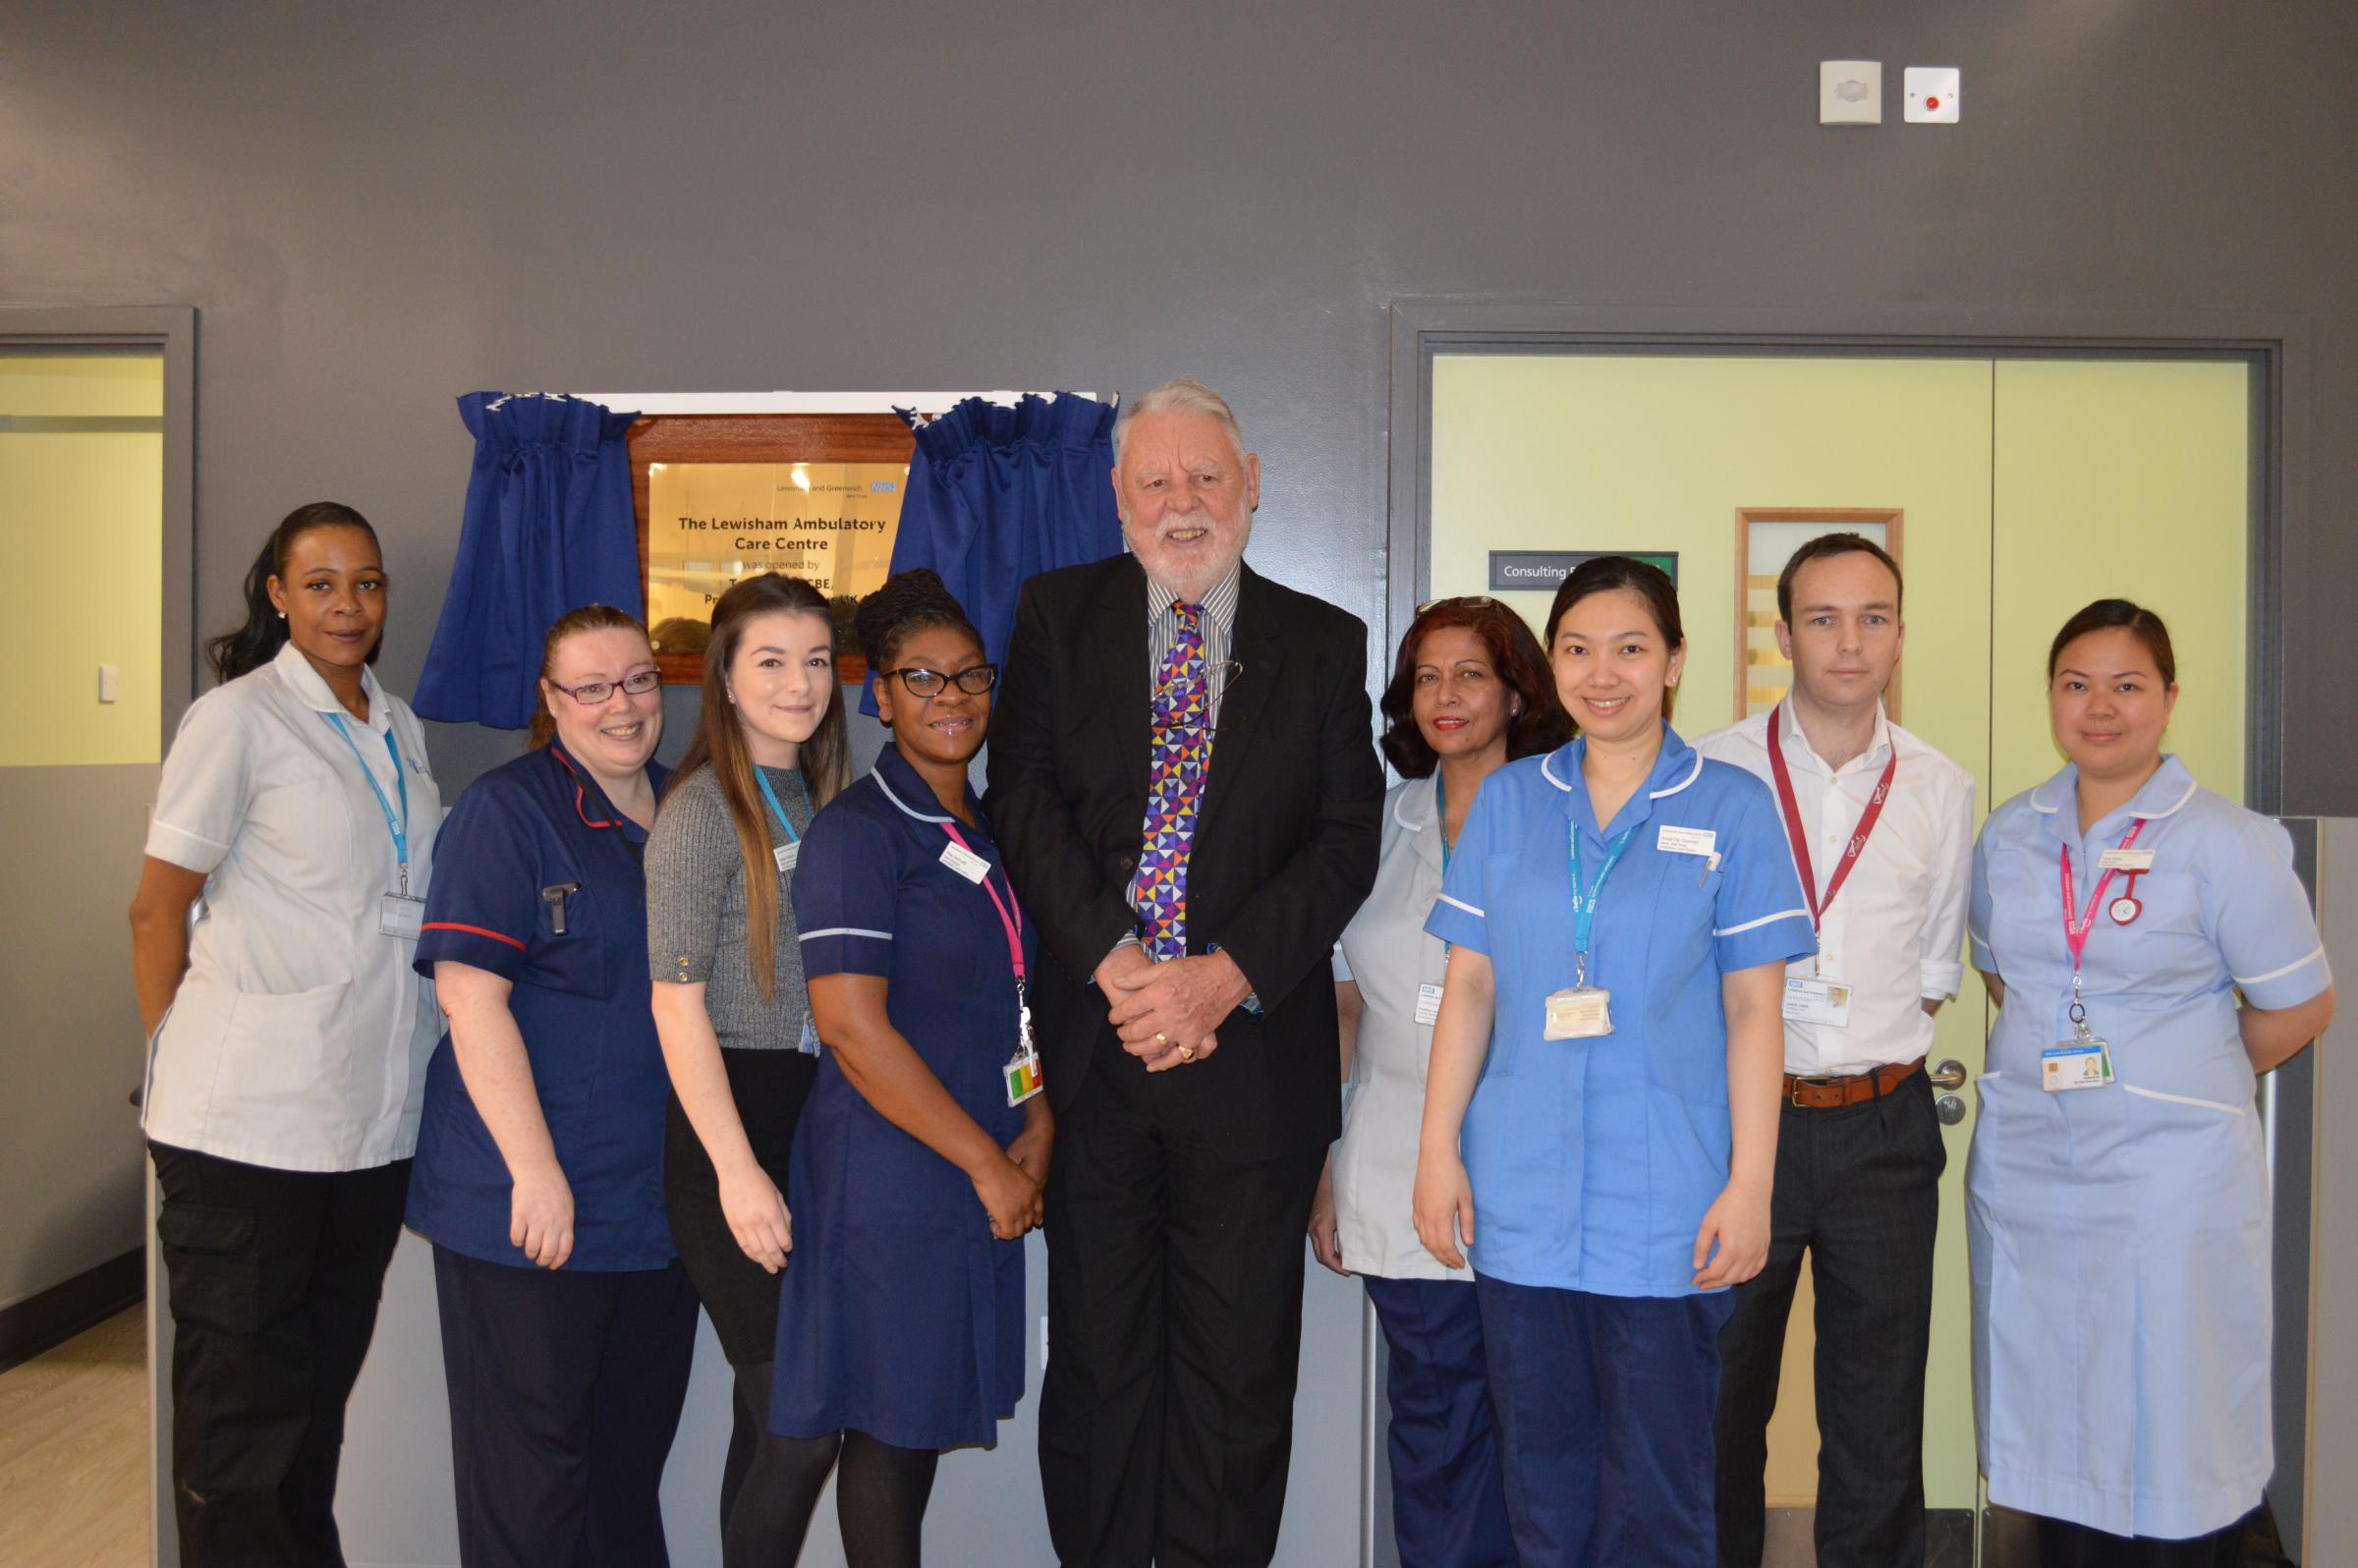 Terry Waite opens Lewisham hospital clinic 30 years late after being taken hostage in Lebanon - News Shopper